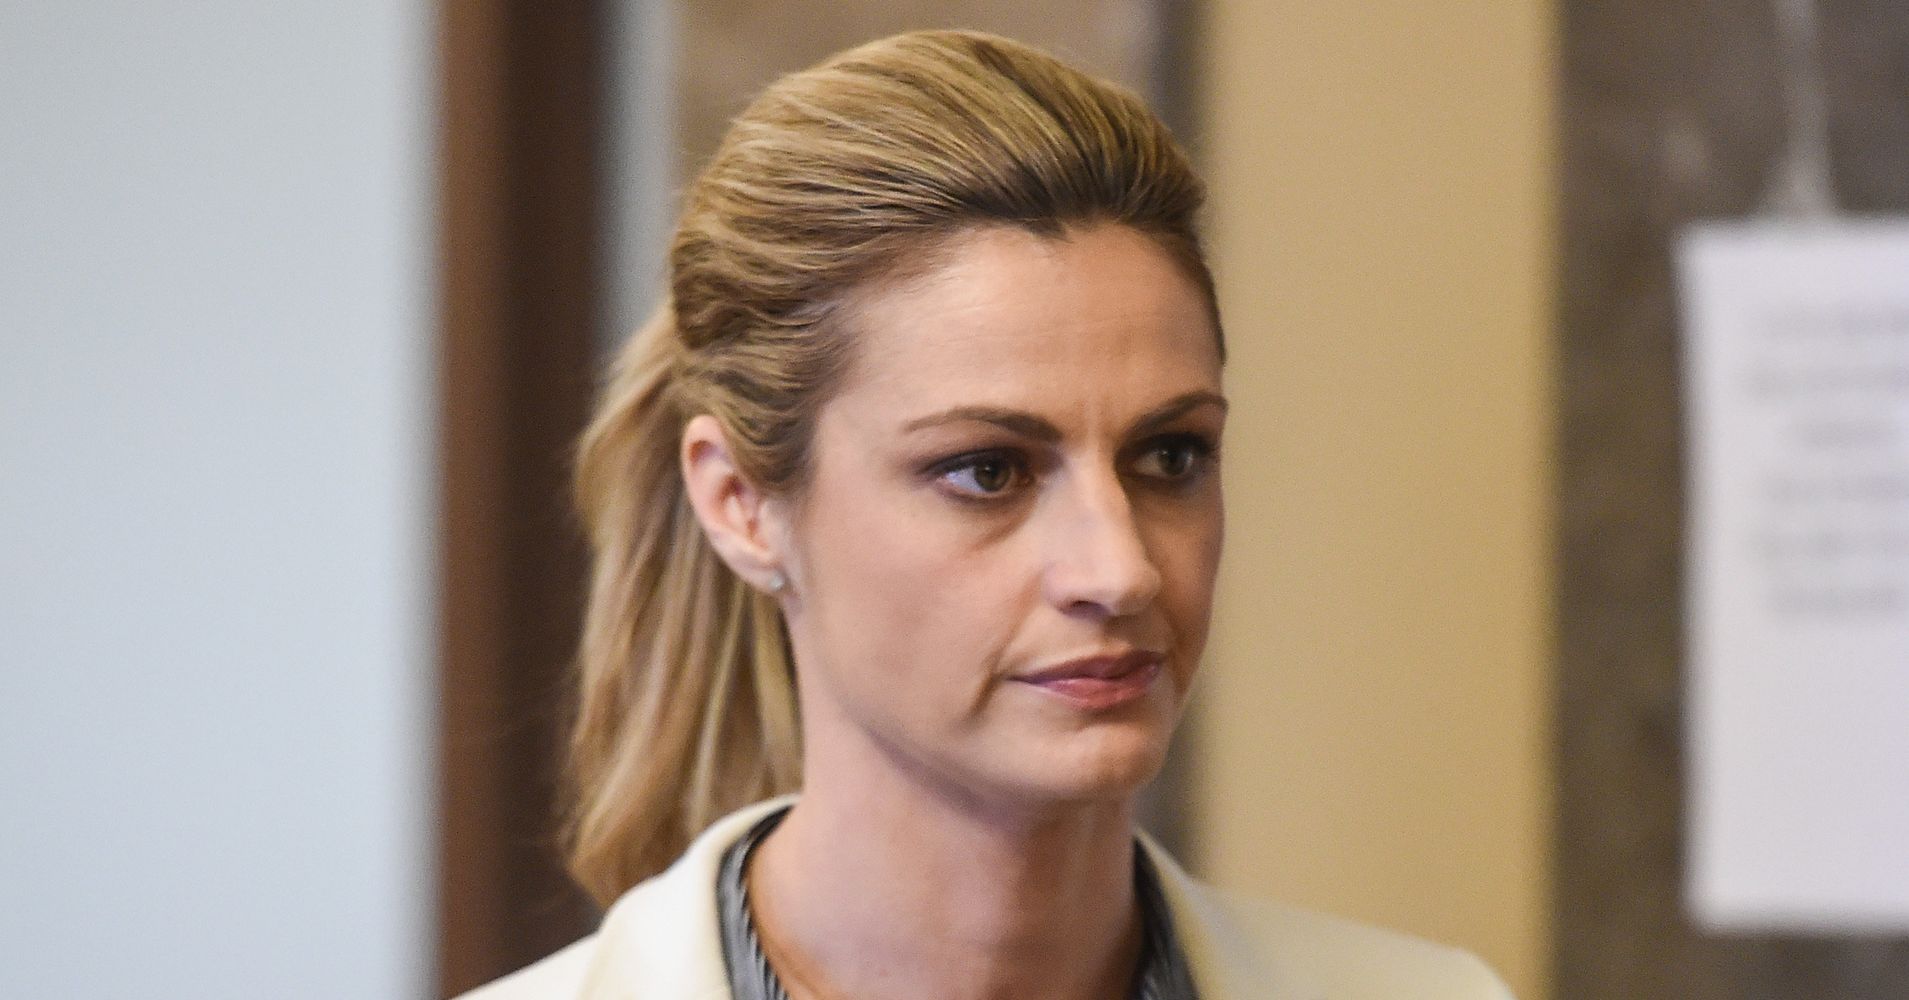 Erin Andrews awarded $55 million in nude video lawsuit 